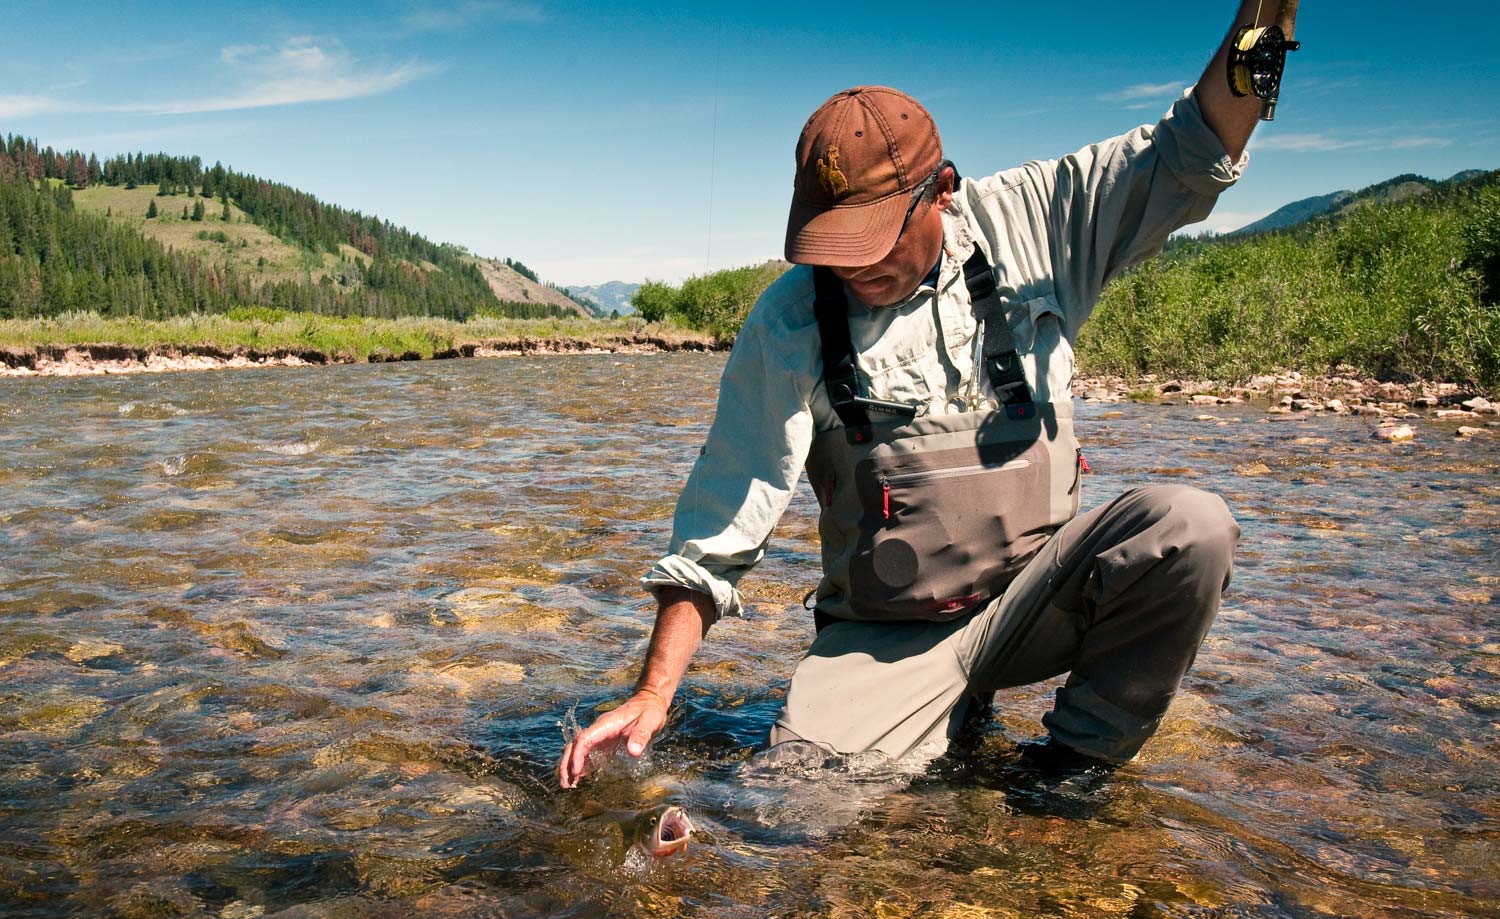 The Embarrassing State of Modern Fly Fishing” is an embarrassing